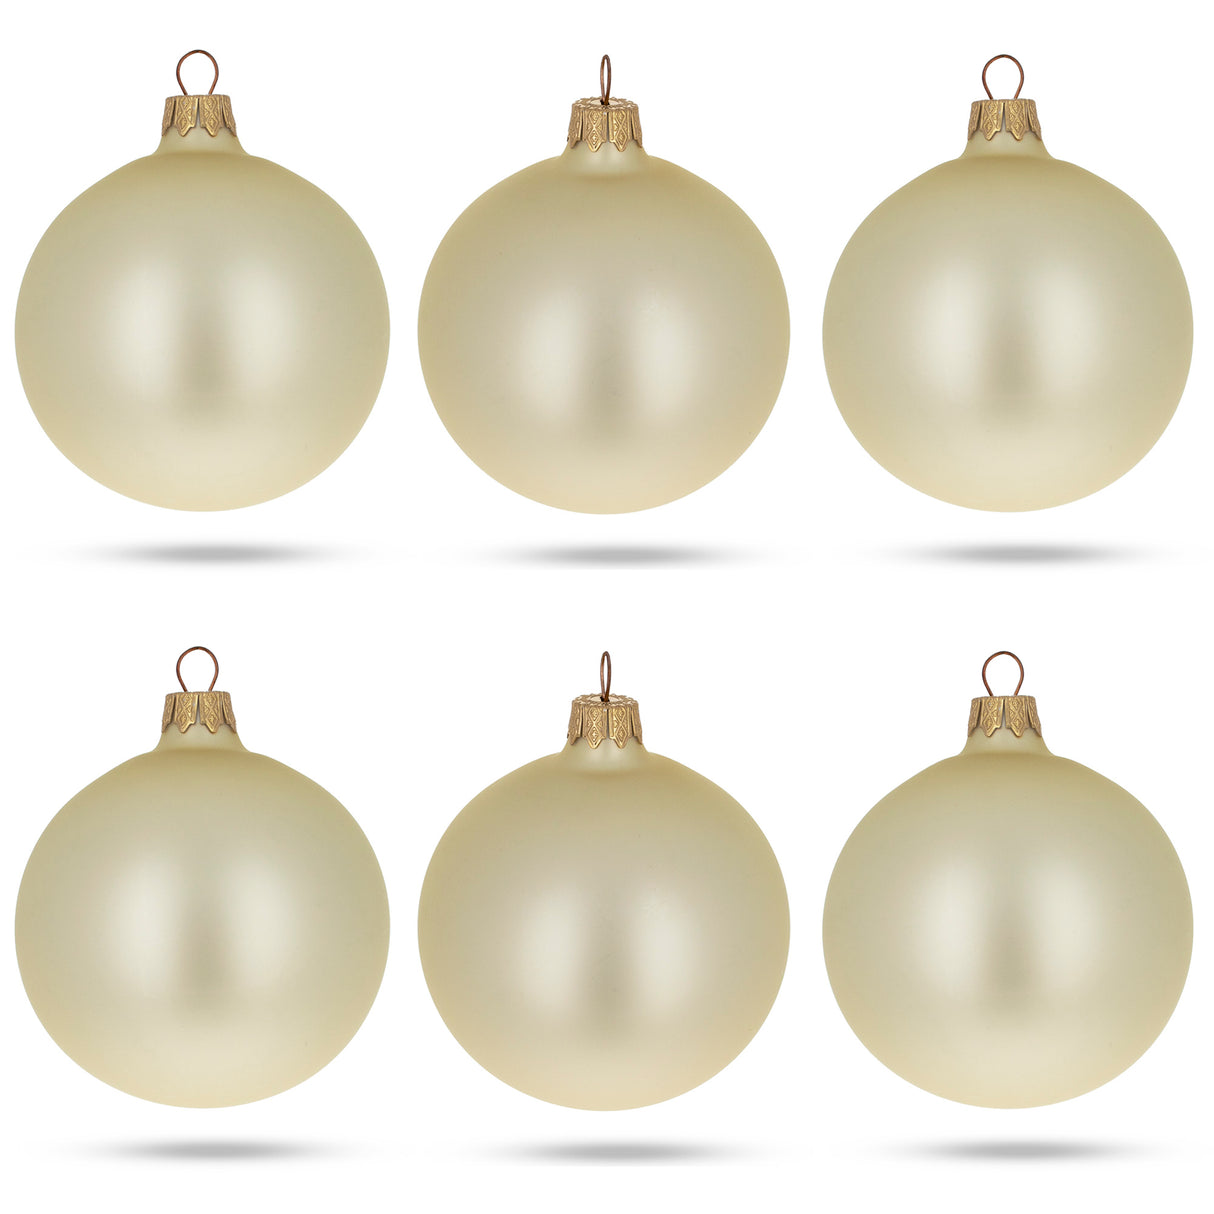 Set of 6 Champagne Solid Color Glass Christmas Ornaments 3.25 Inches in Beige color, Round shape